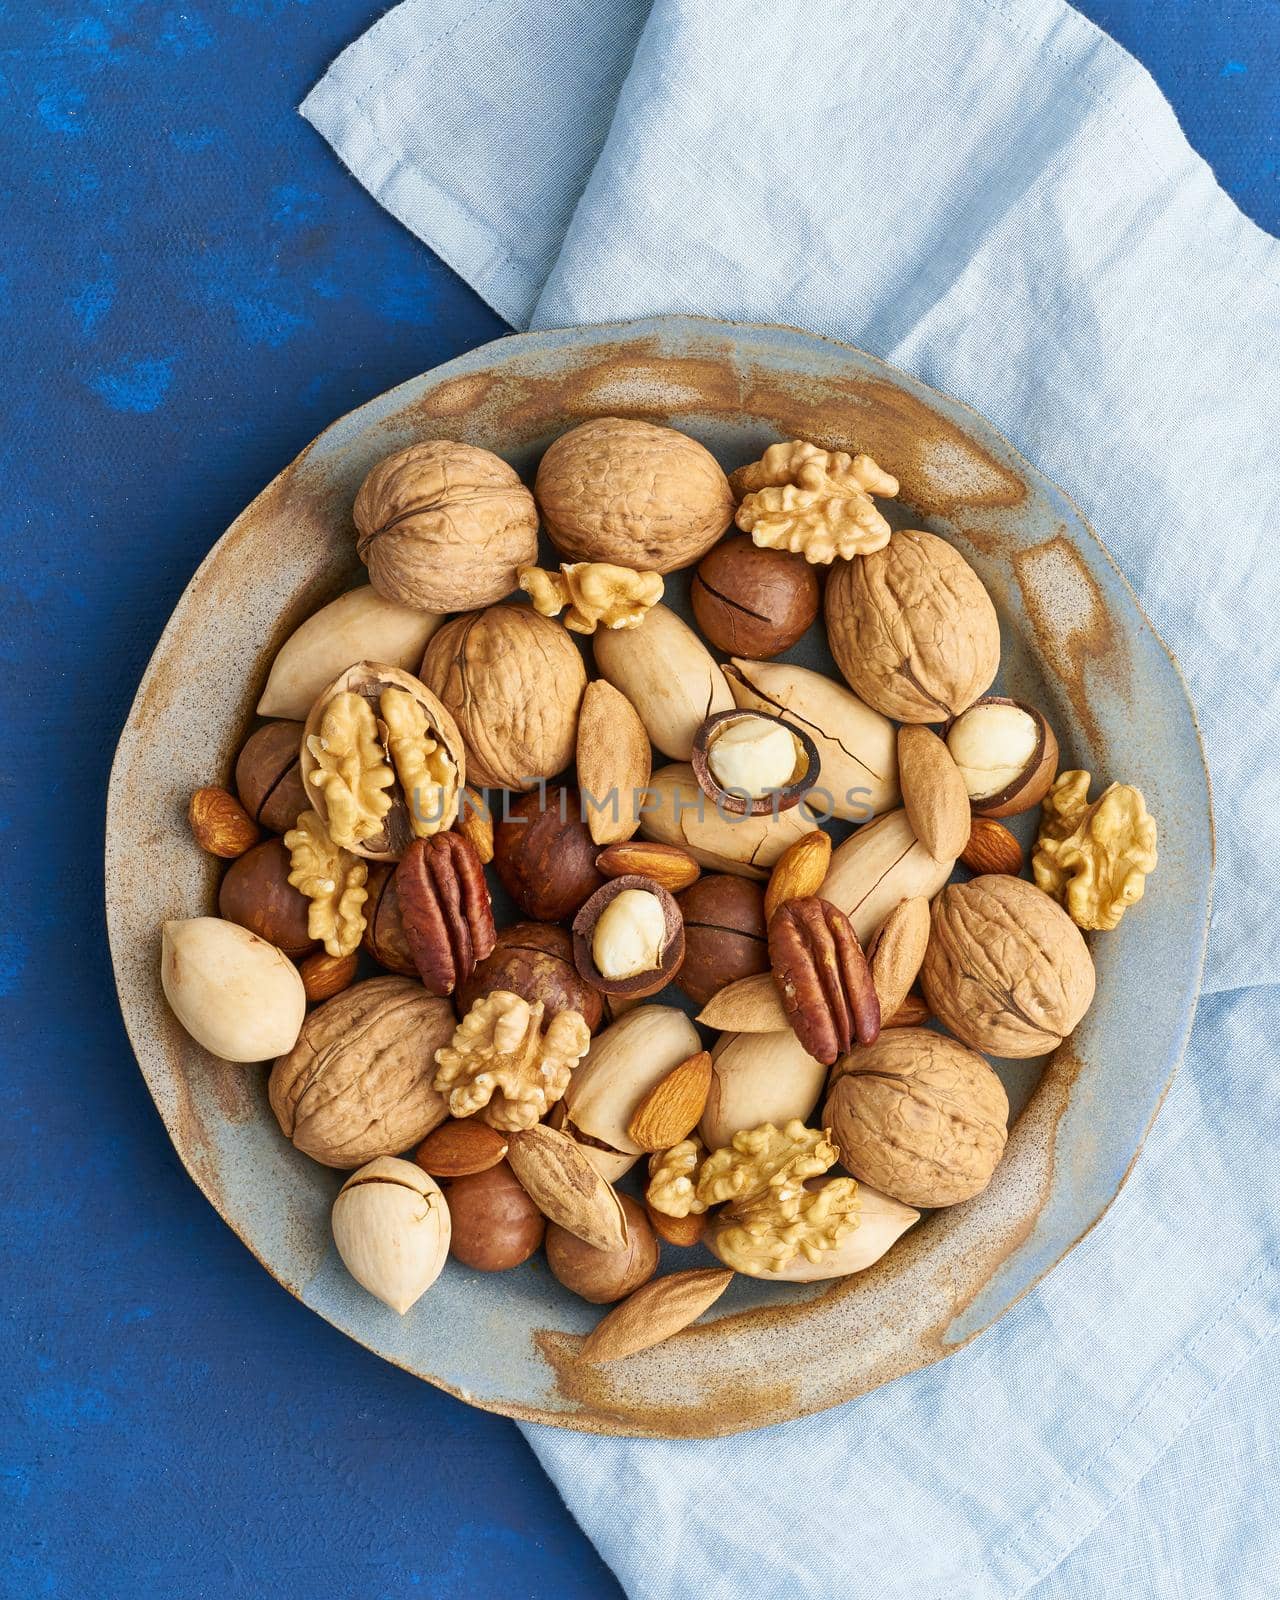 Classic blue in food. Mix of nuts on plate - walnut, almonds, pecans, macadamia by NataBene